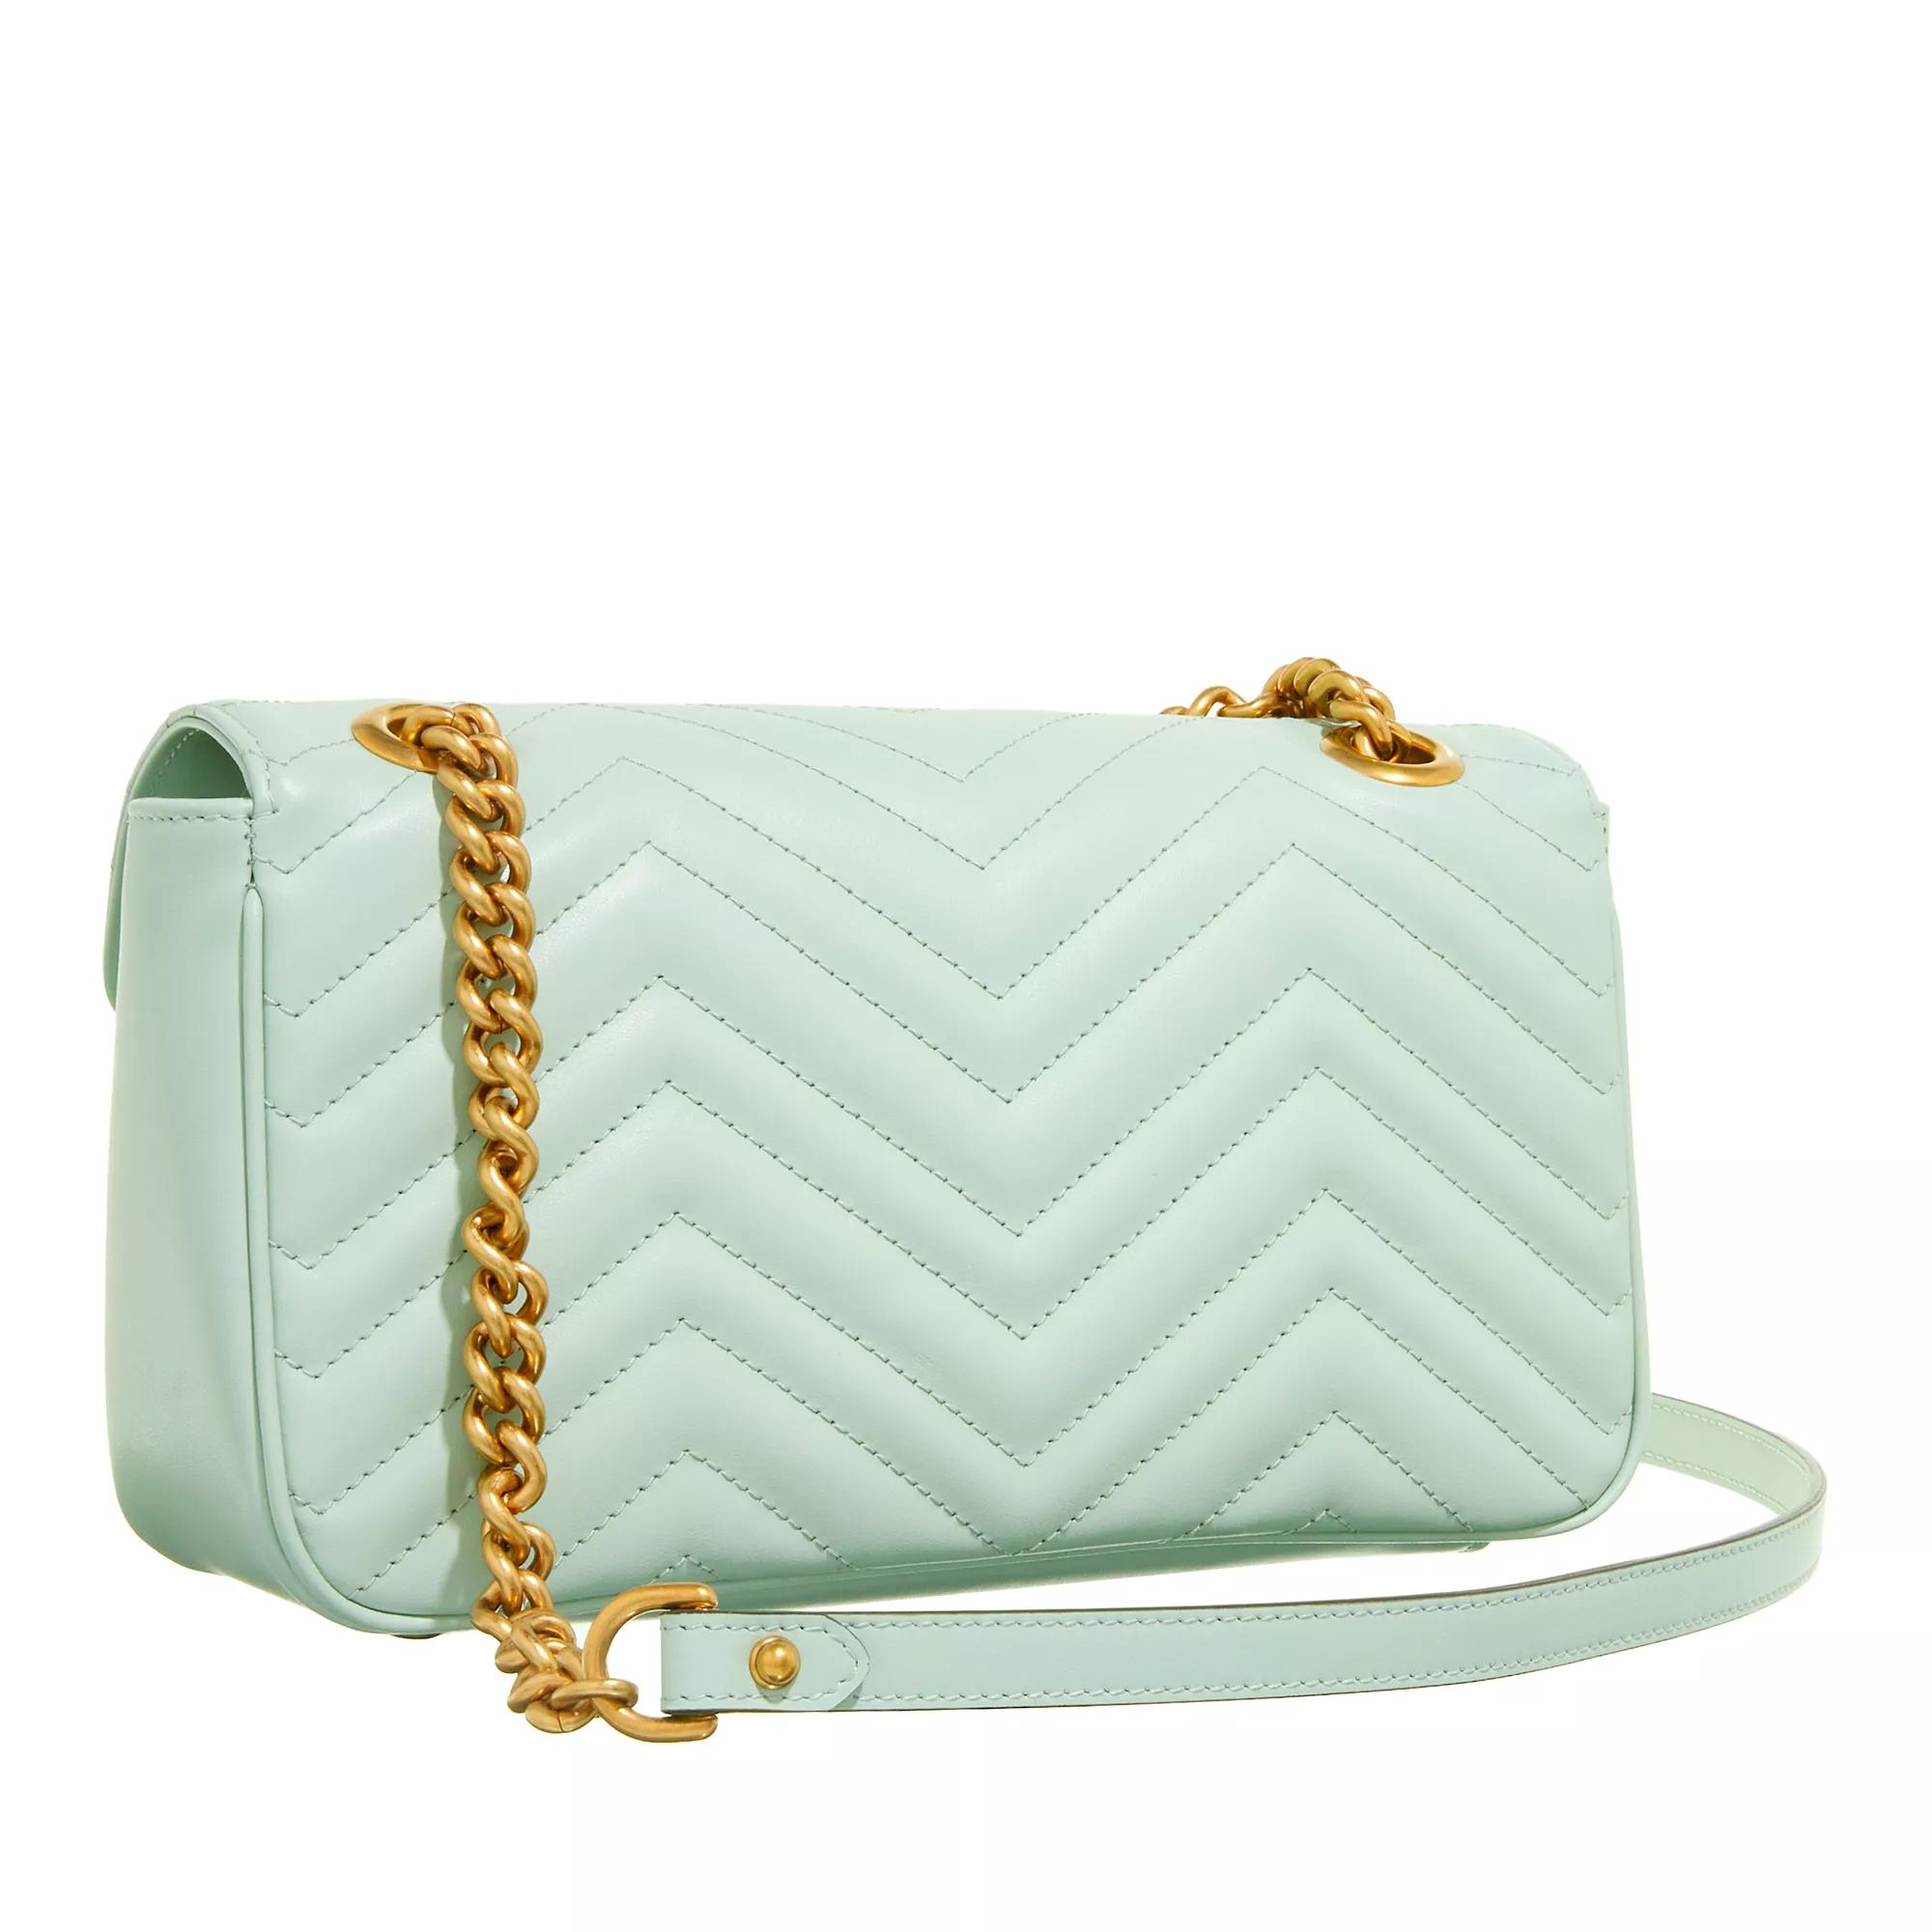 Gucci Crossbody bags Small GG Marmont Shoulder Bag Matelassé Leather in groen